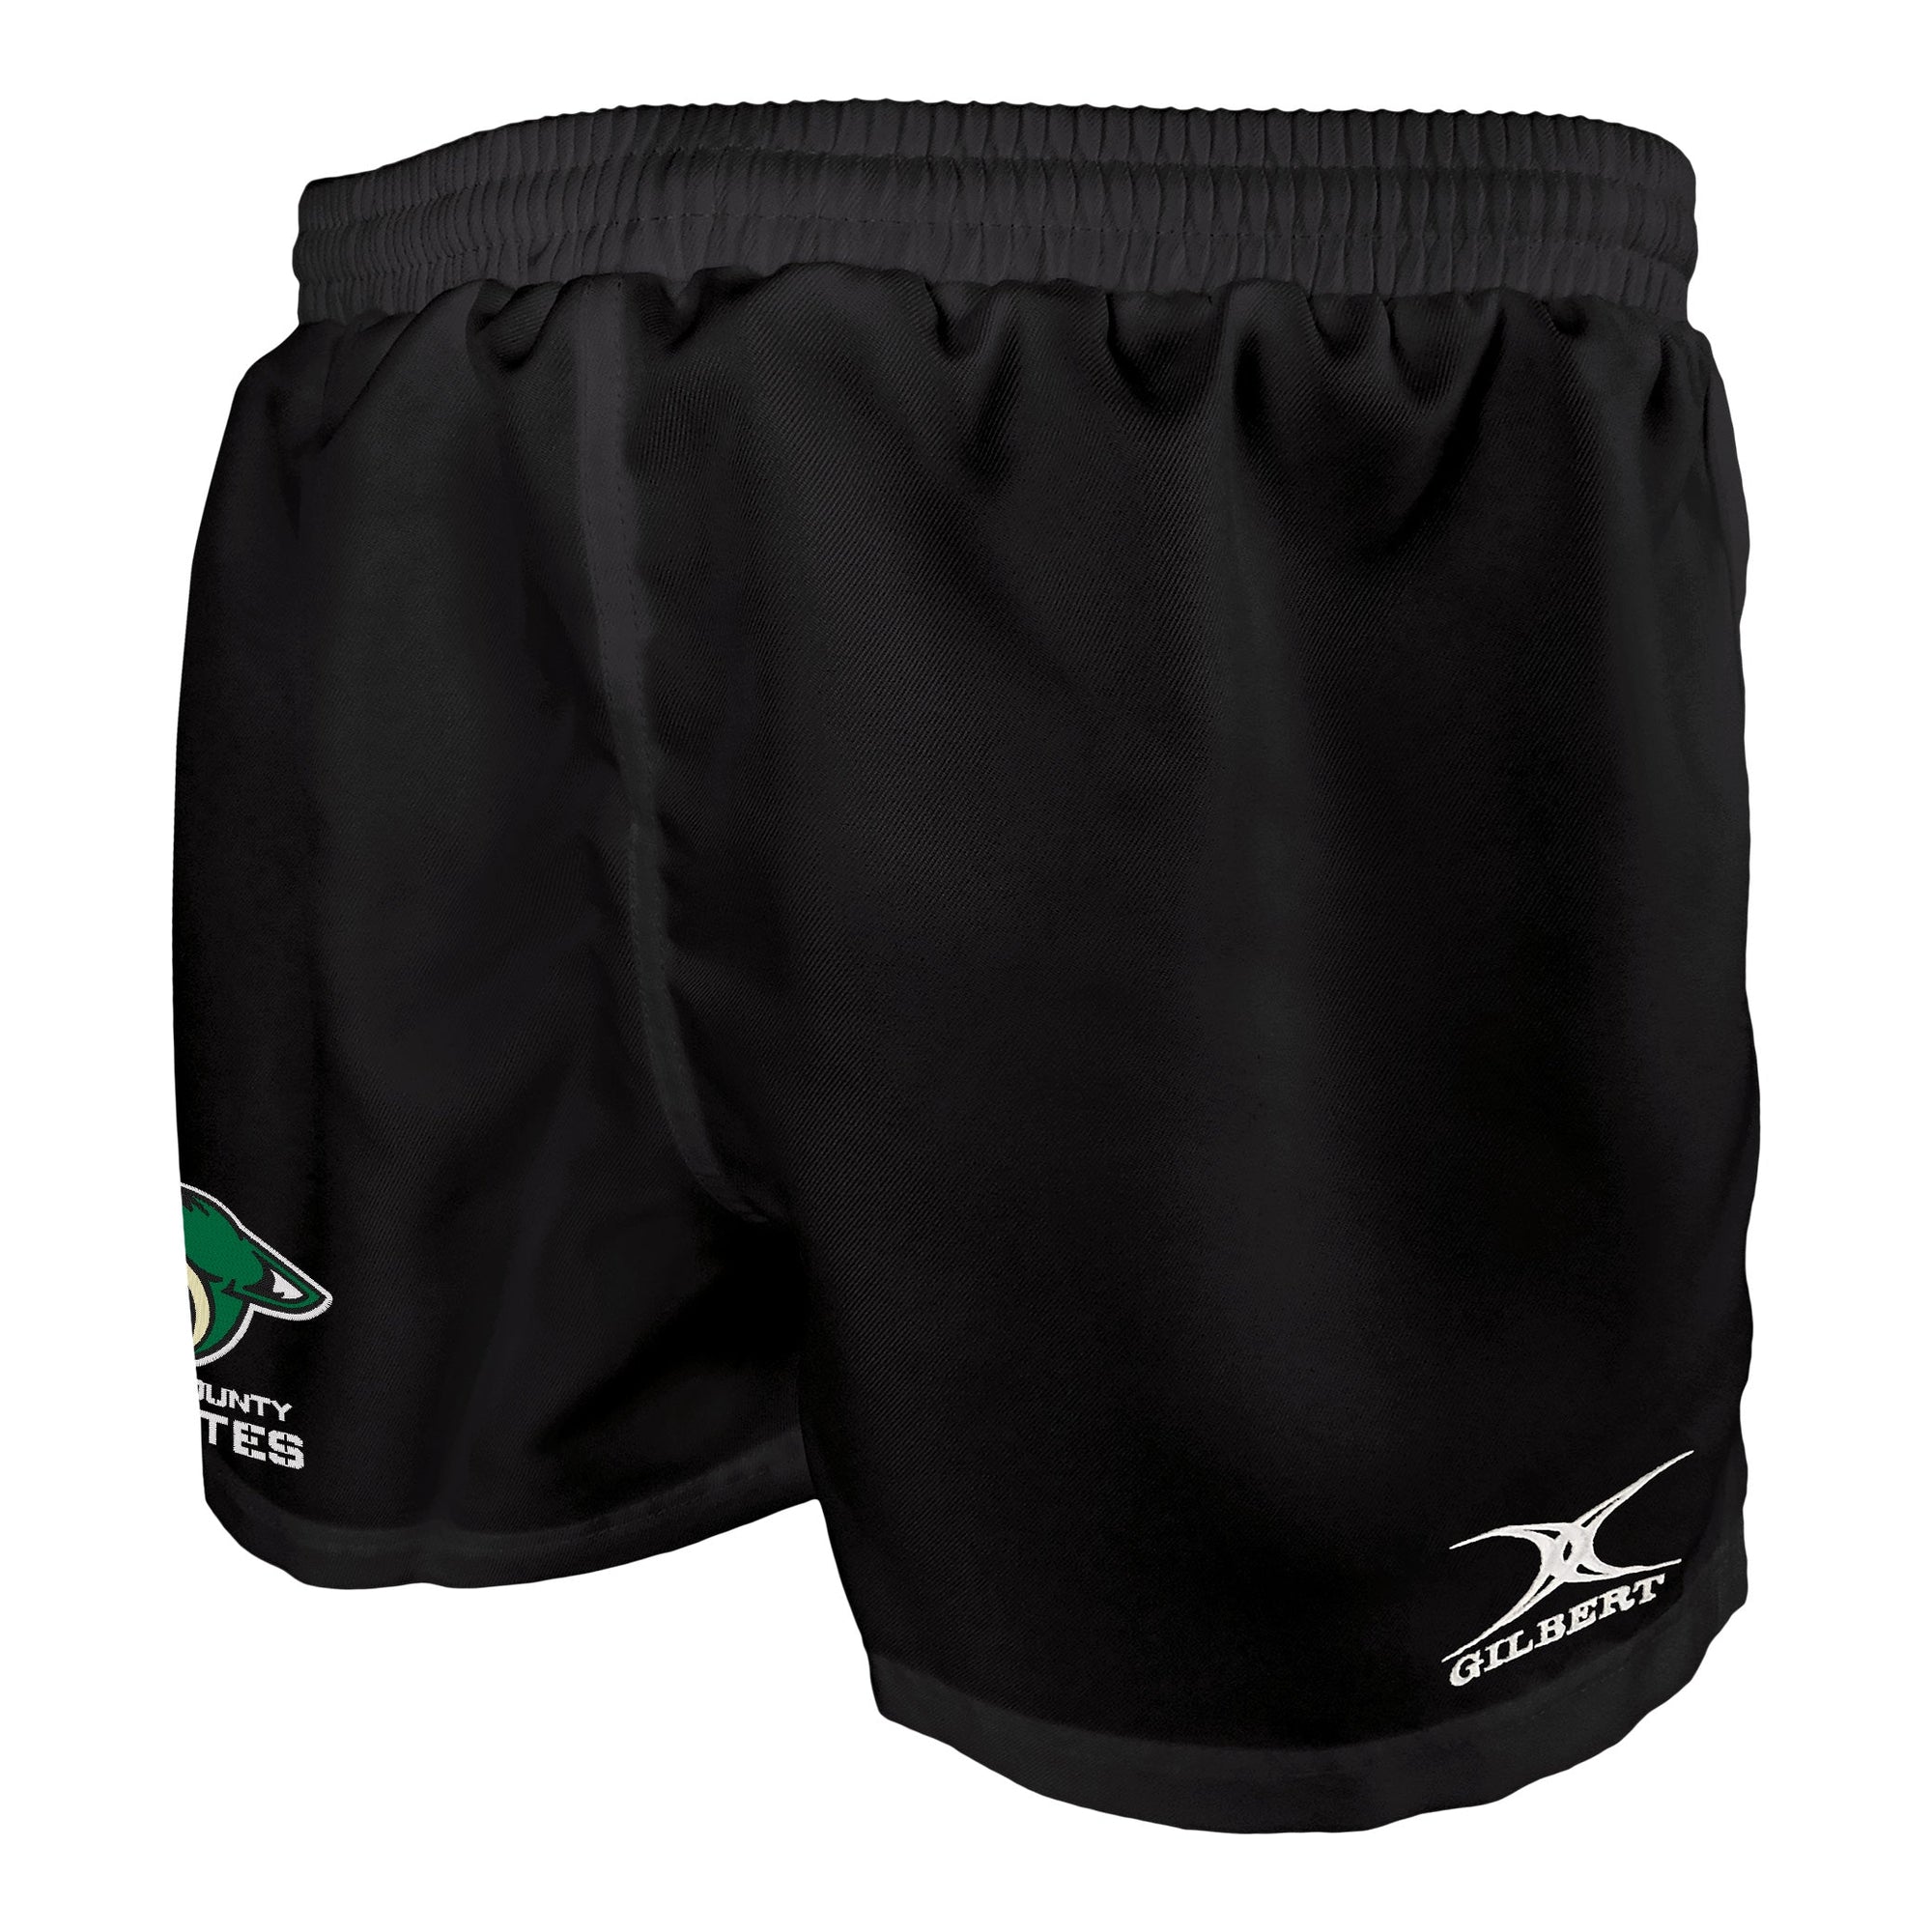 Rugby Imports Lake County Saracen Rugby Shorts